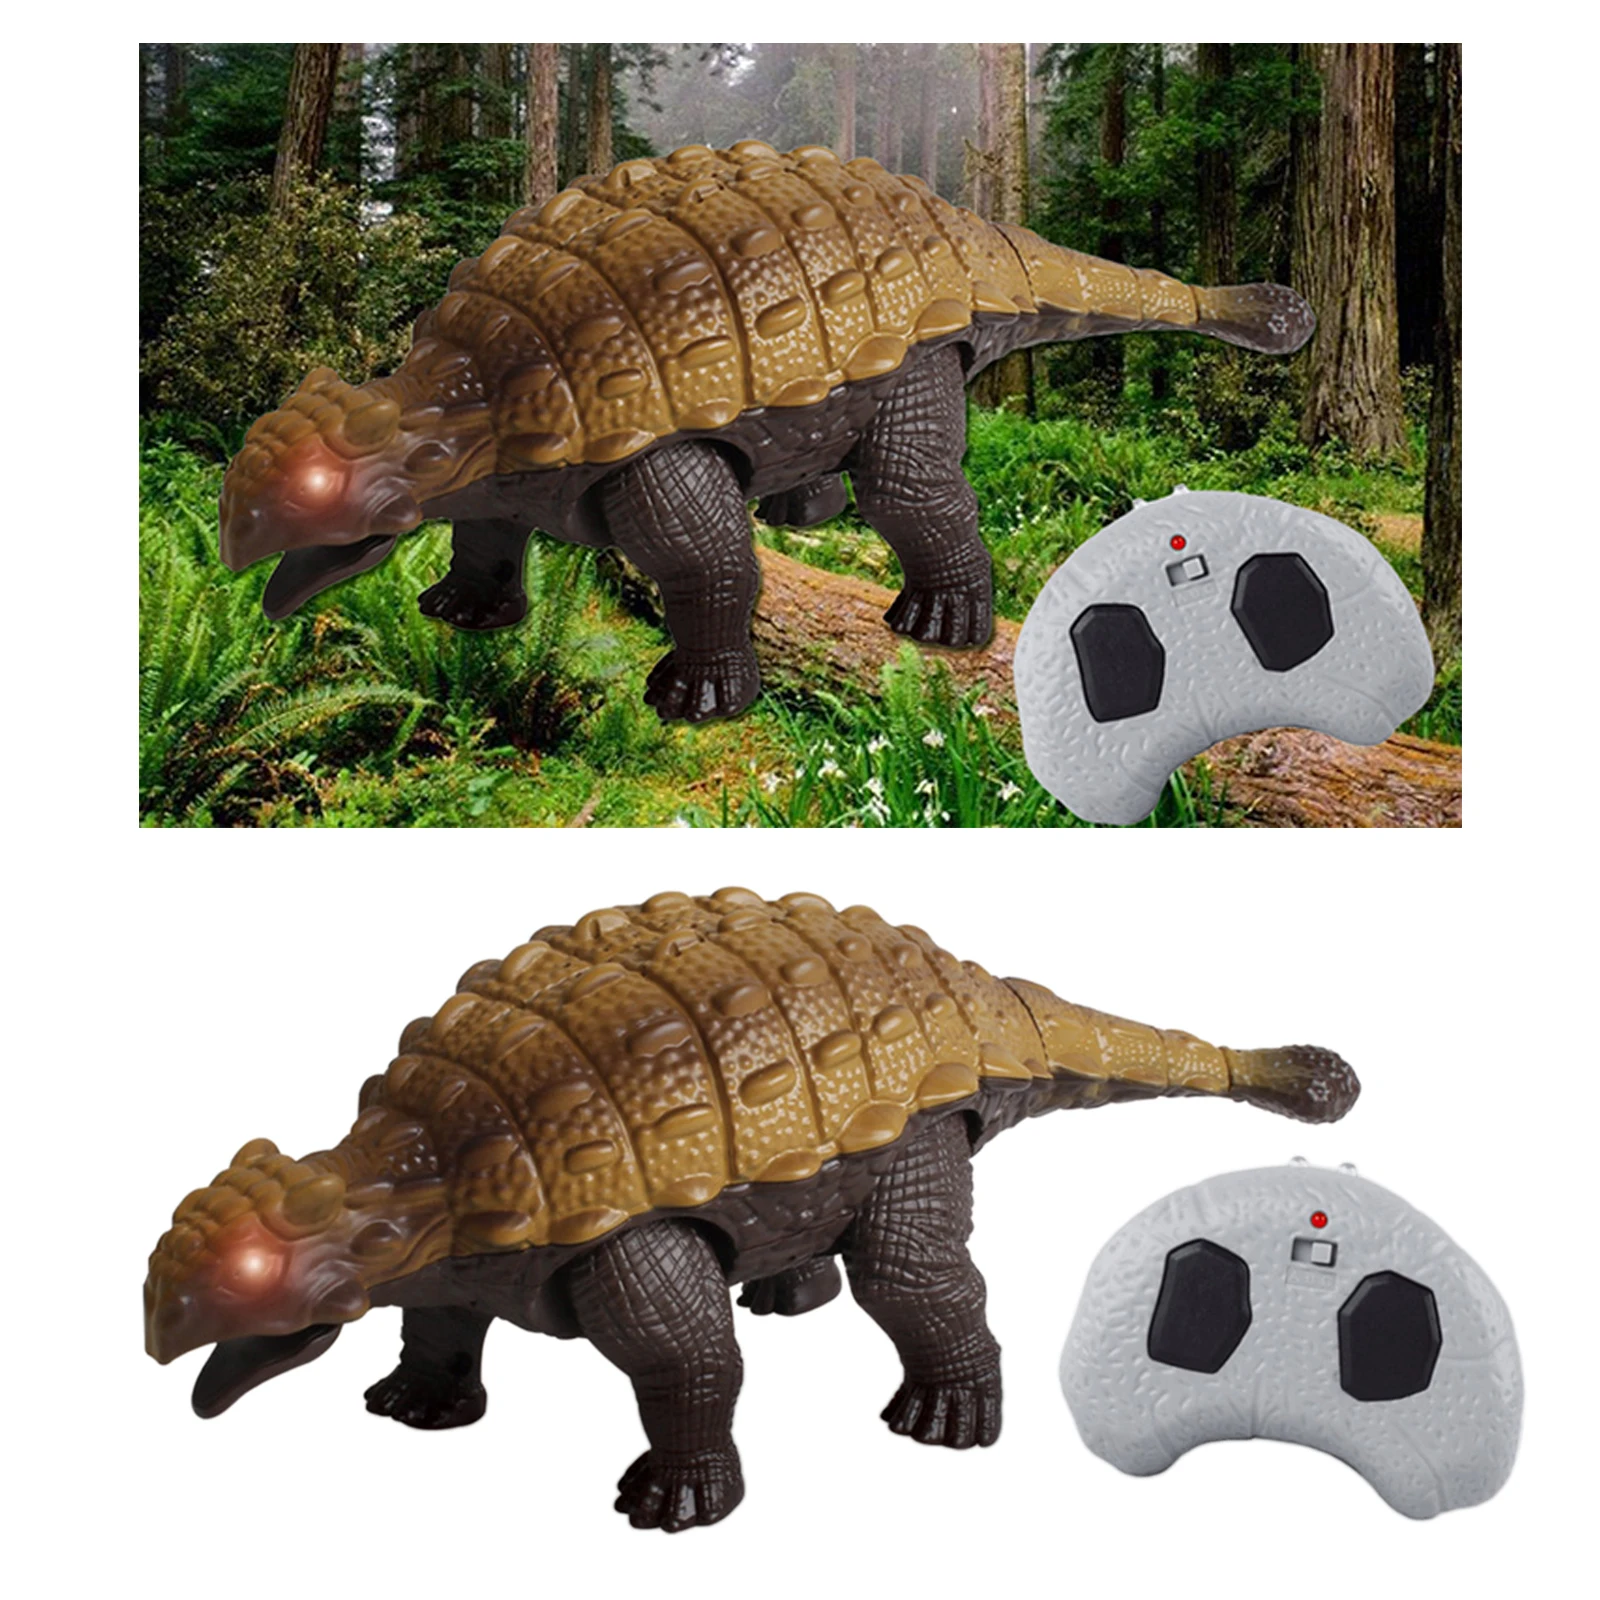 RC Dinosaur Toy for Boys Girls Action Figure Electronic Toys Walking with LED Light Up Battery Operated Age 3+